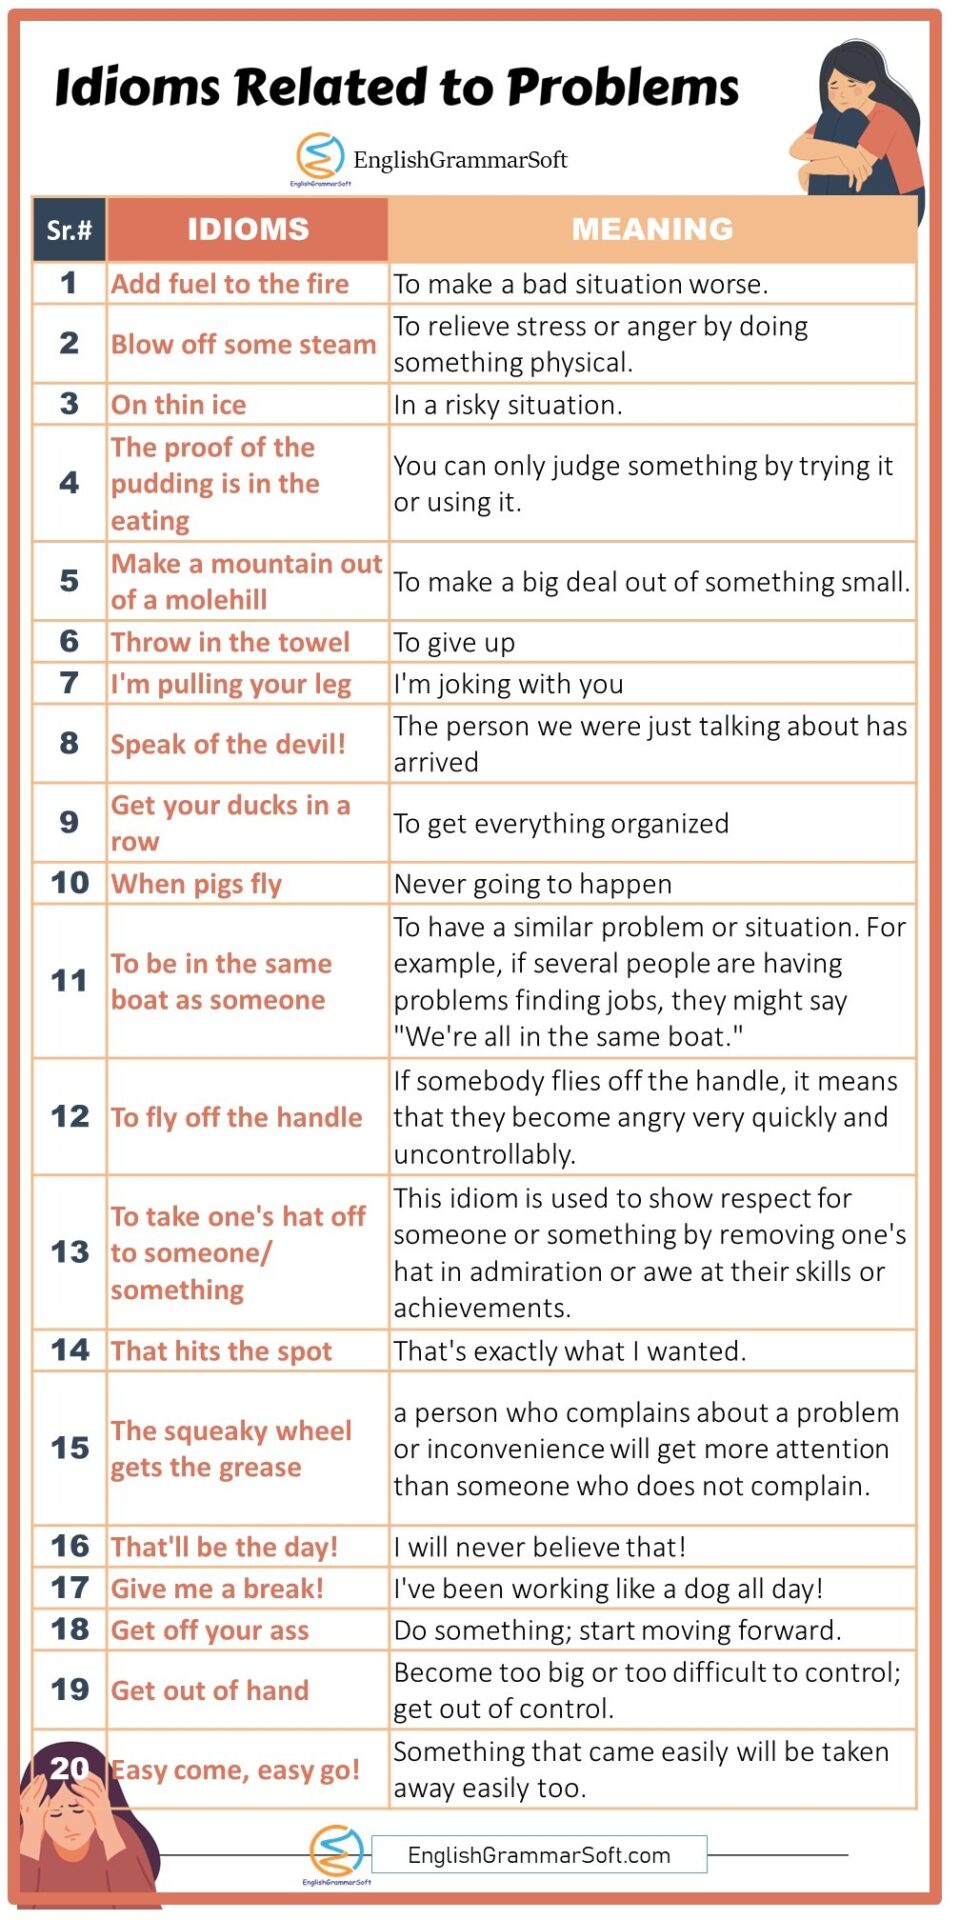 Idioms Related to Problems with meaning